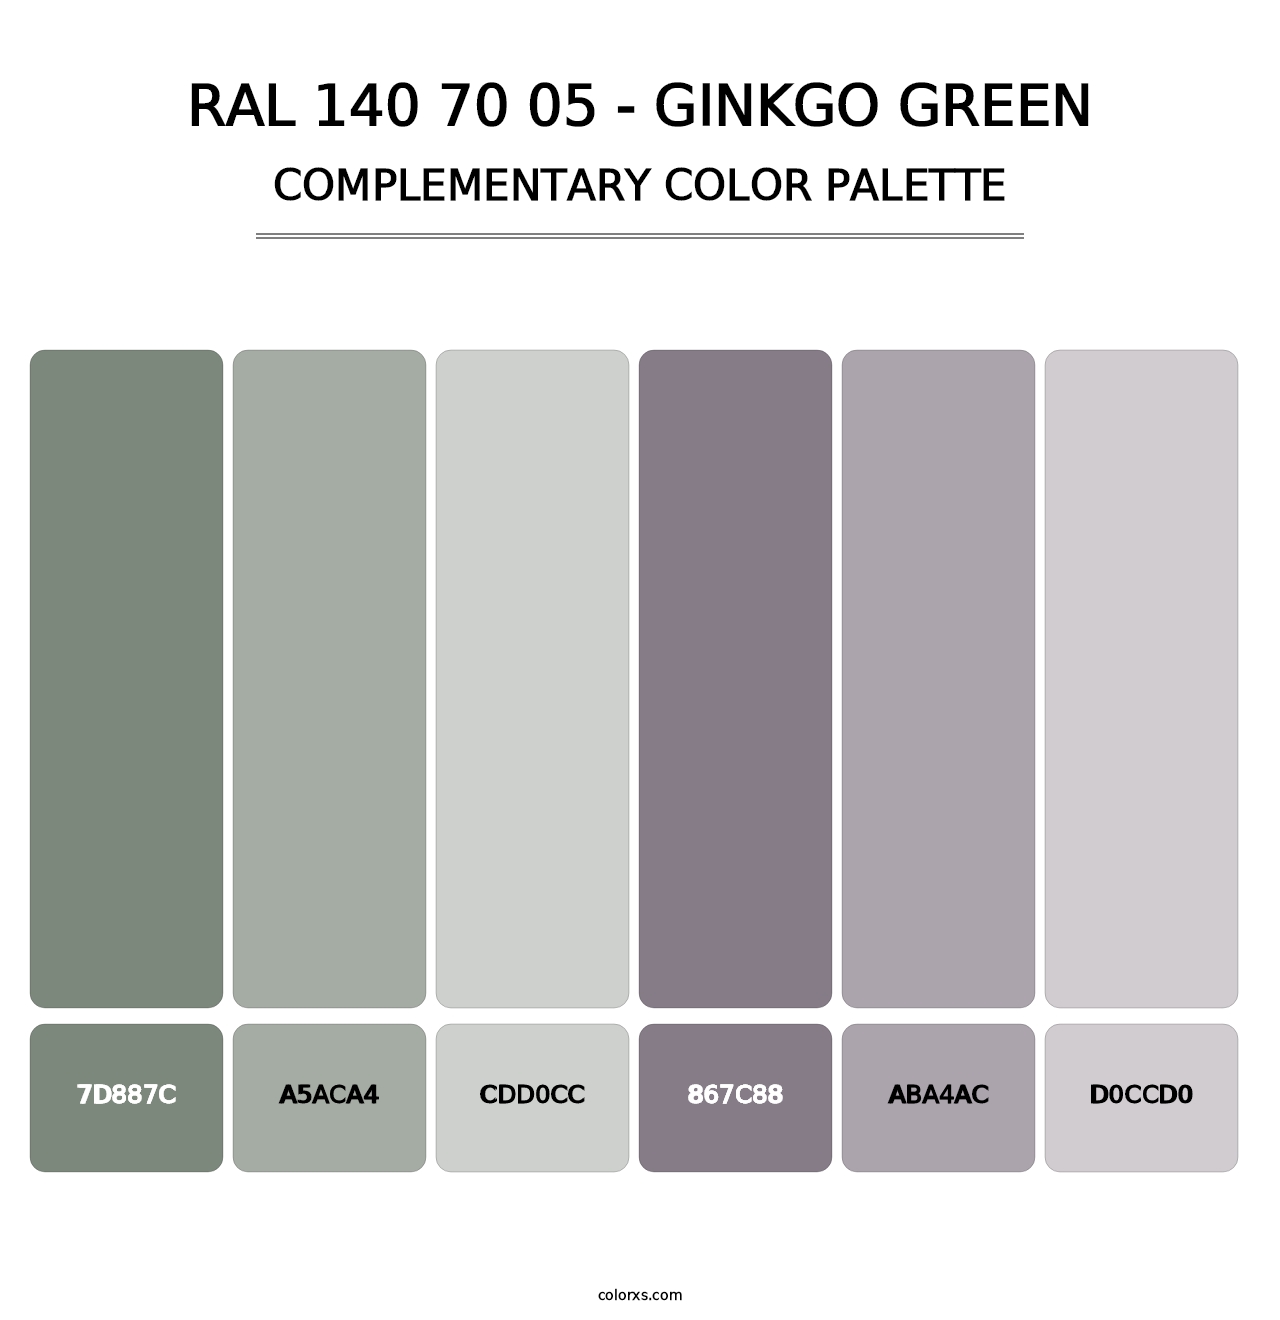 RAL 140 70 05 - Ginkgo Green - Complementary Color Palette